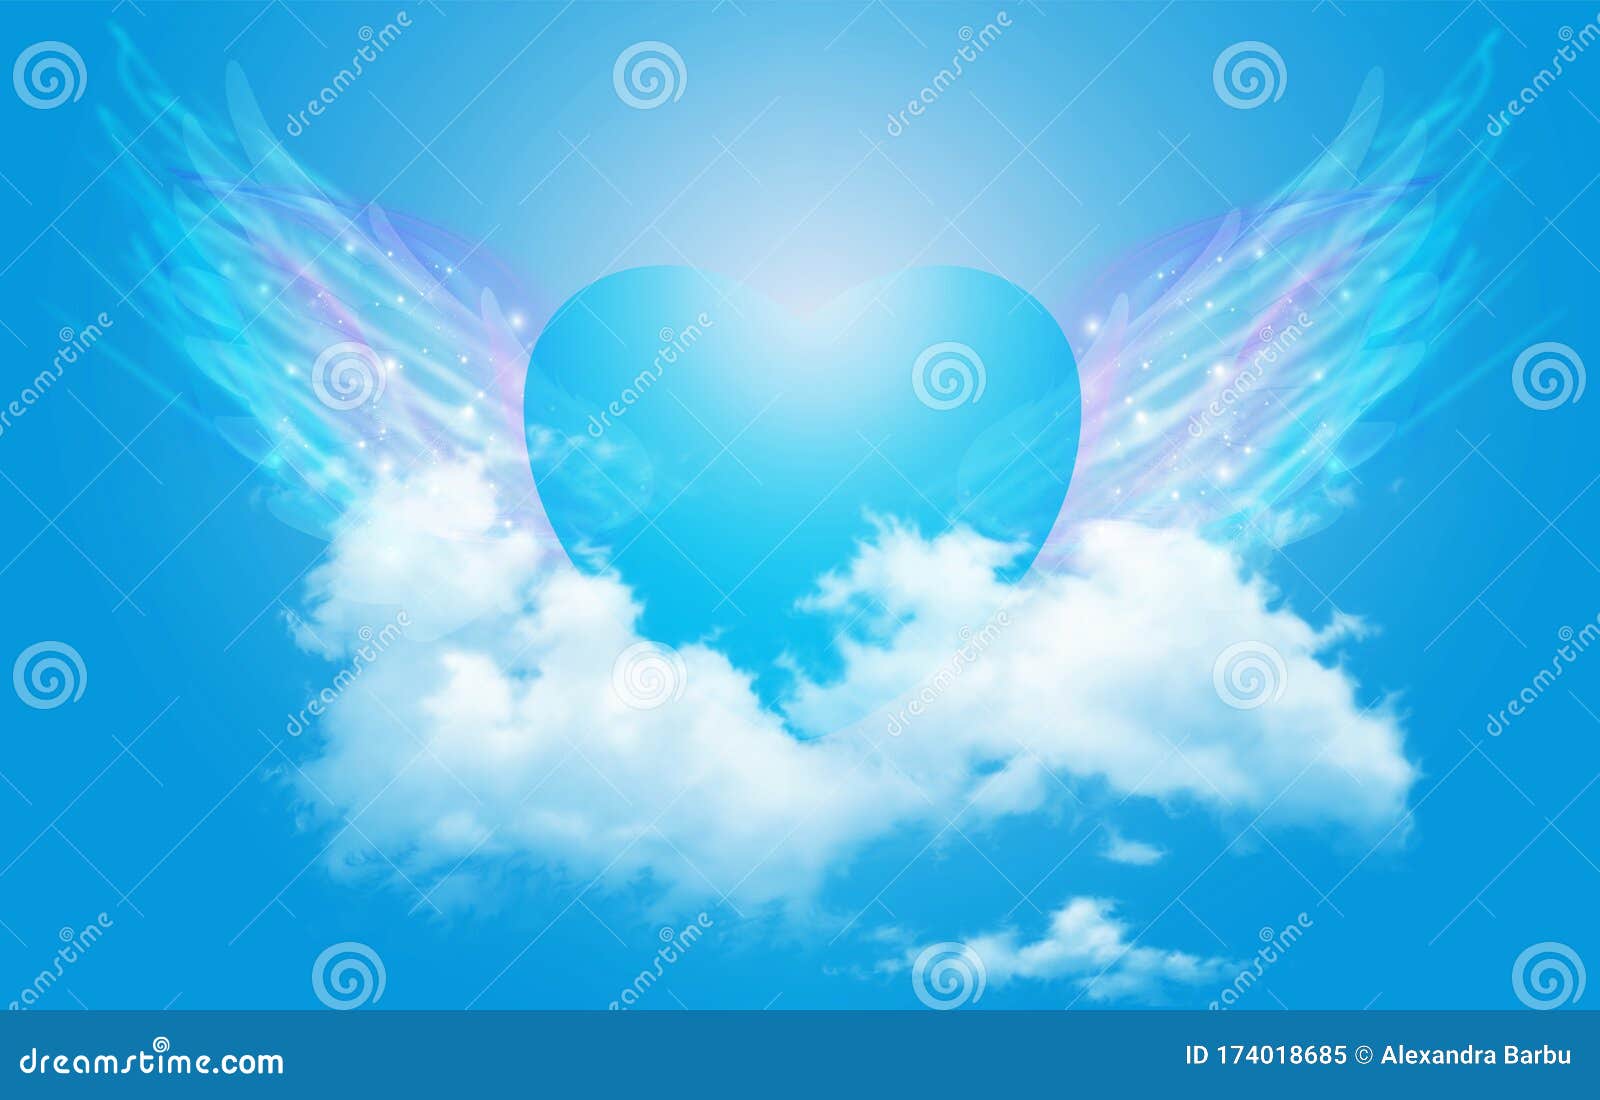 spiritual guidance, angel of light and love doing a miracle on sky, rainbow angelic wings